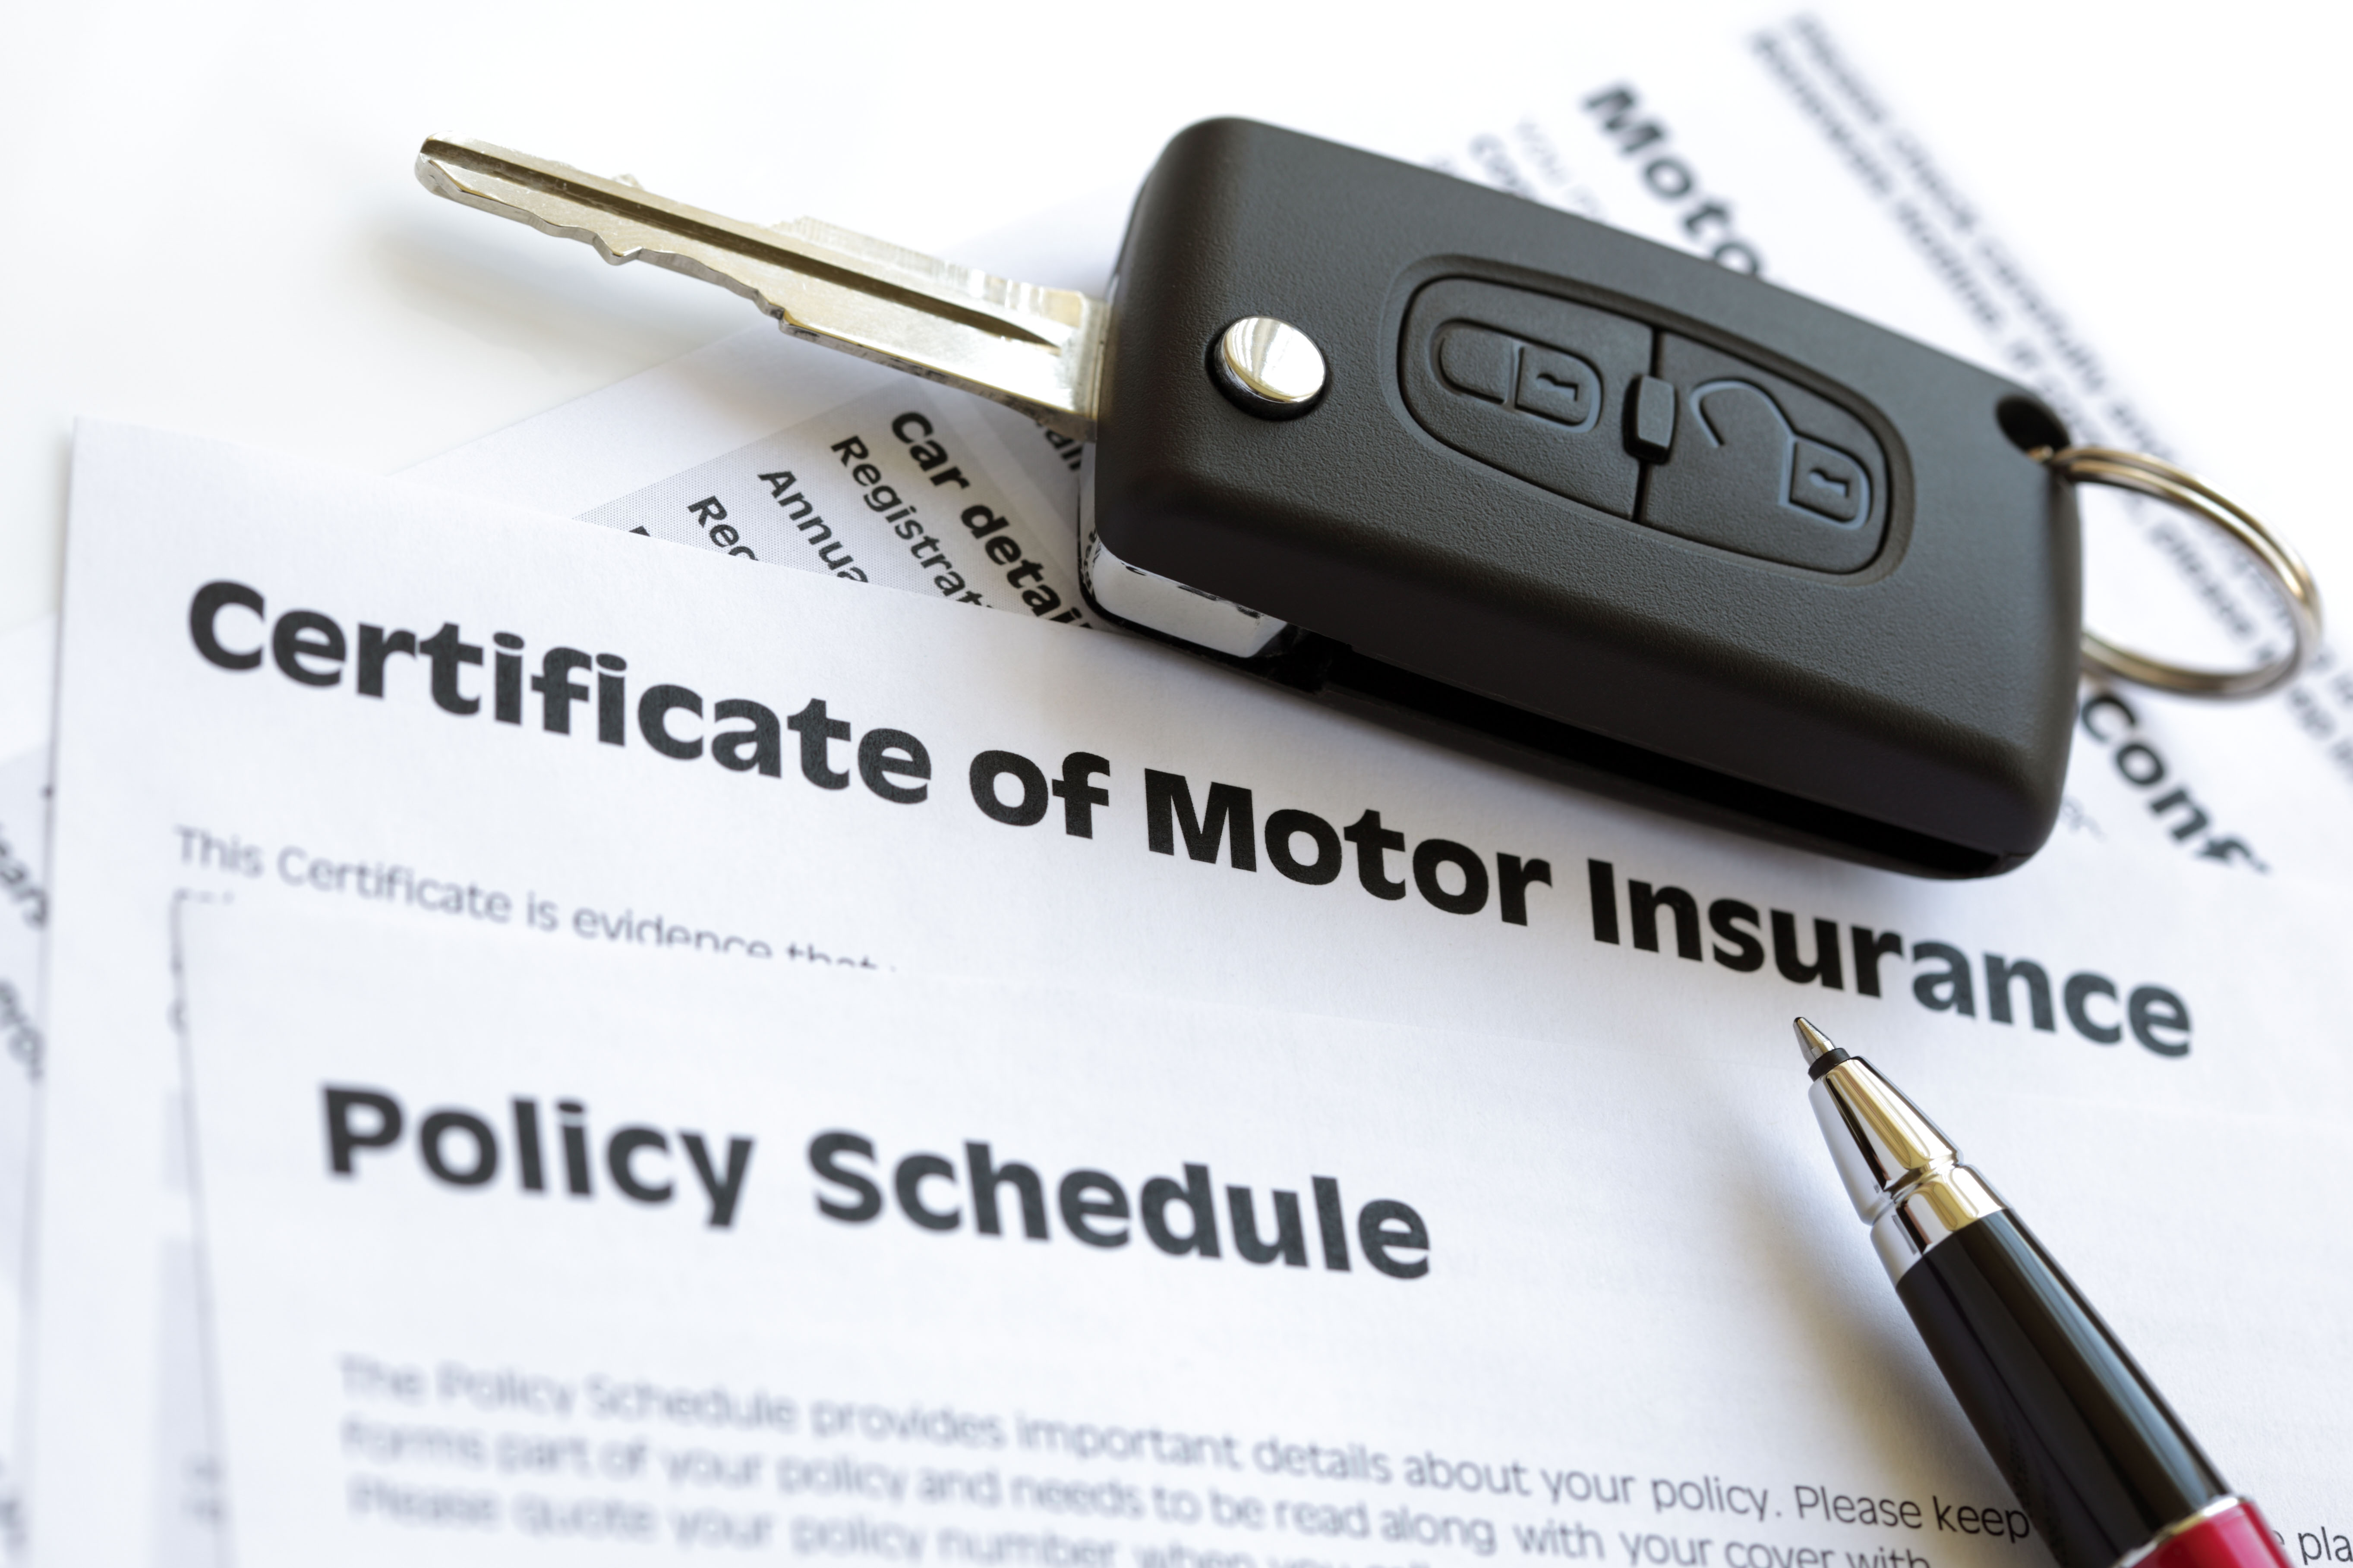 Motor insurance certificate with car key